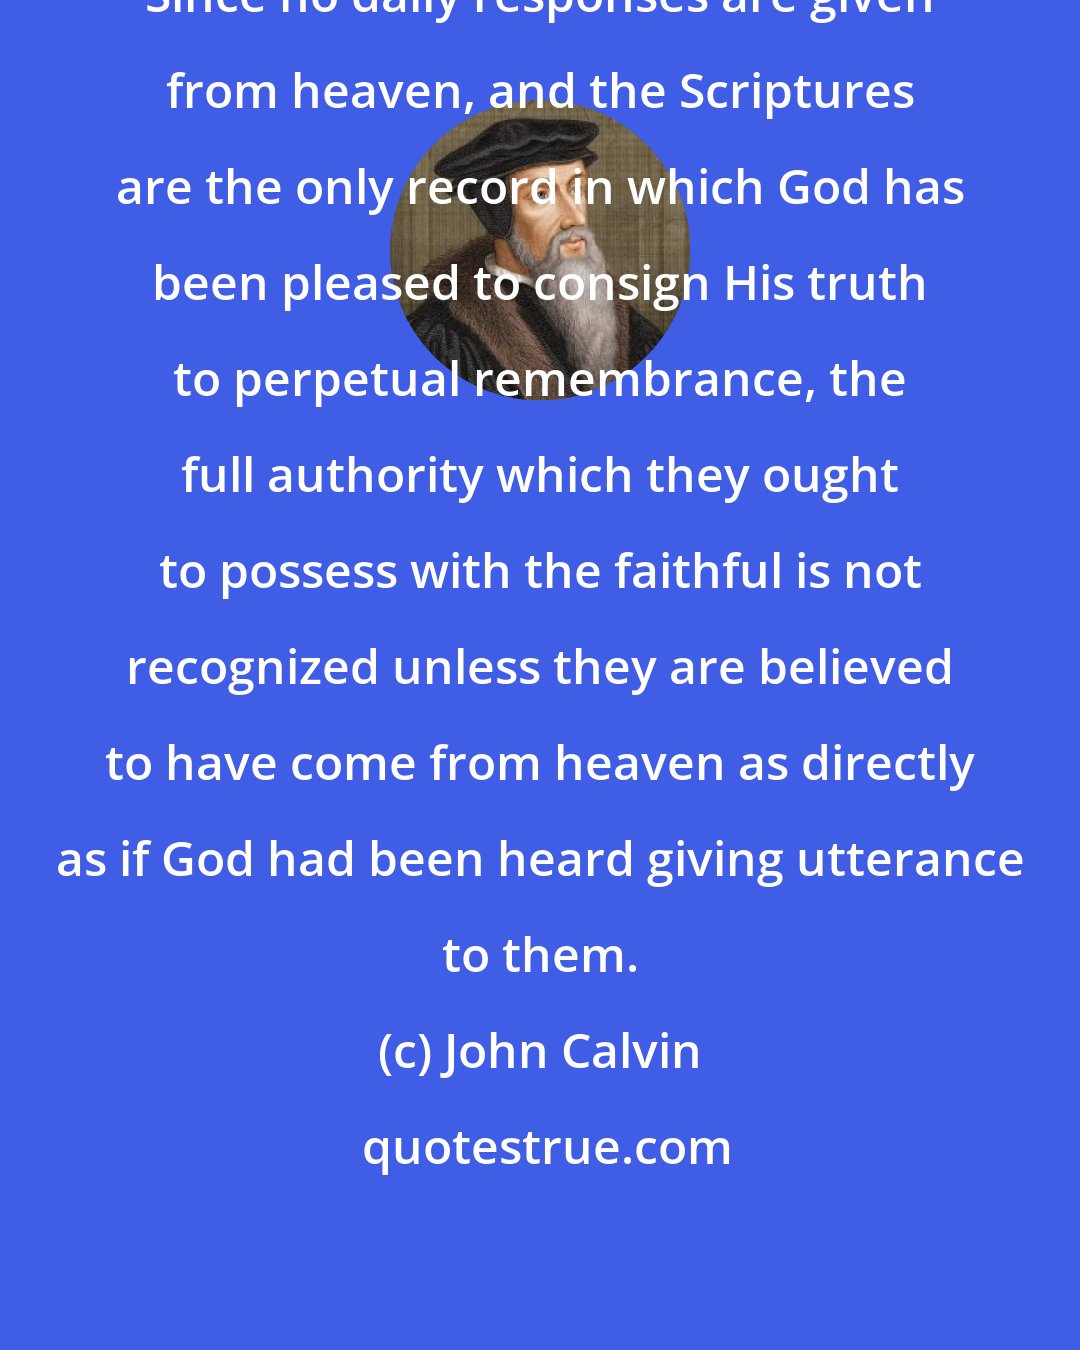 John Calvin: Since no daily responses are given from heaven, and the Scriptures are the only record in which God has been pleased to consign His truth to perpetual remembrance, the full authority which they ought to possess with the faithful is not recognized unless they are believed to have come from heaven as directly as if God had been heard giving utterance to them.